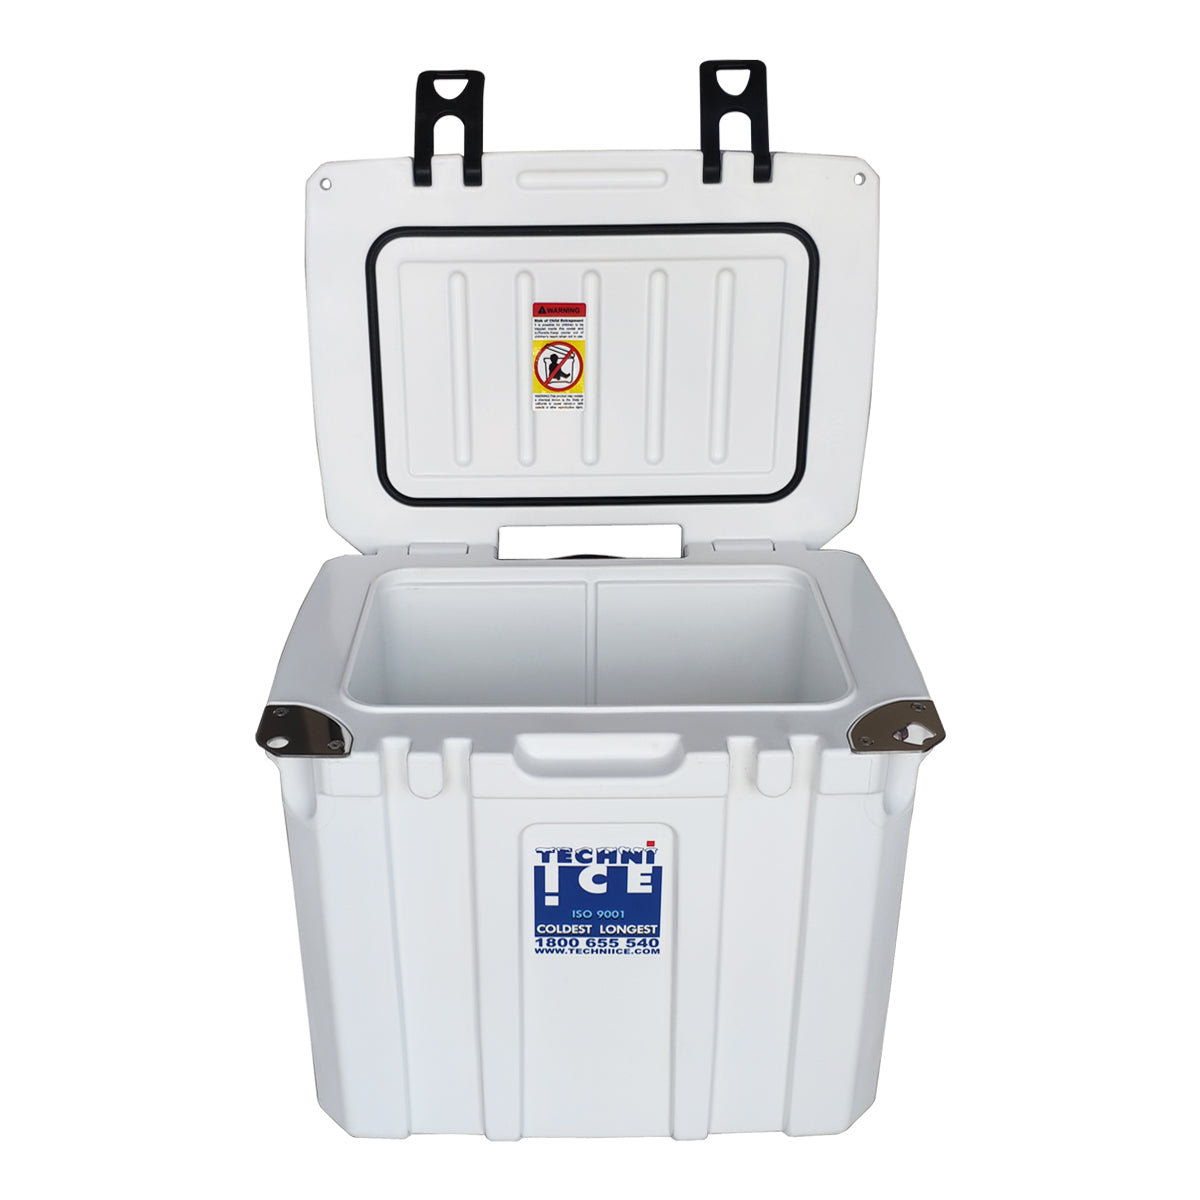 Techni Ice Signature Hybrid Premium Ice Box 35L White with Wheels & Telescopic Travel Handle *PREORDER FOR JULY DISPATCH *FREE 6 REUSABLE DRY ICE PACKS VALUES $32.95